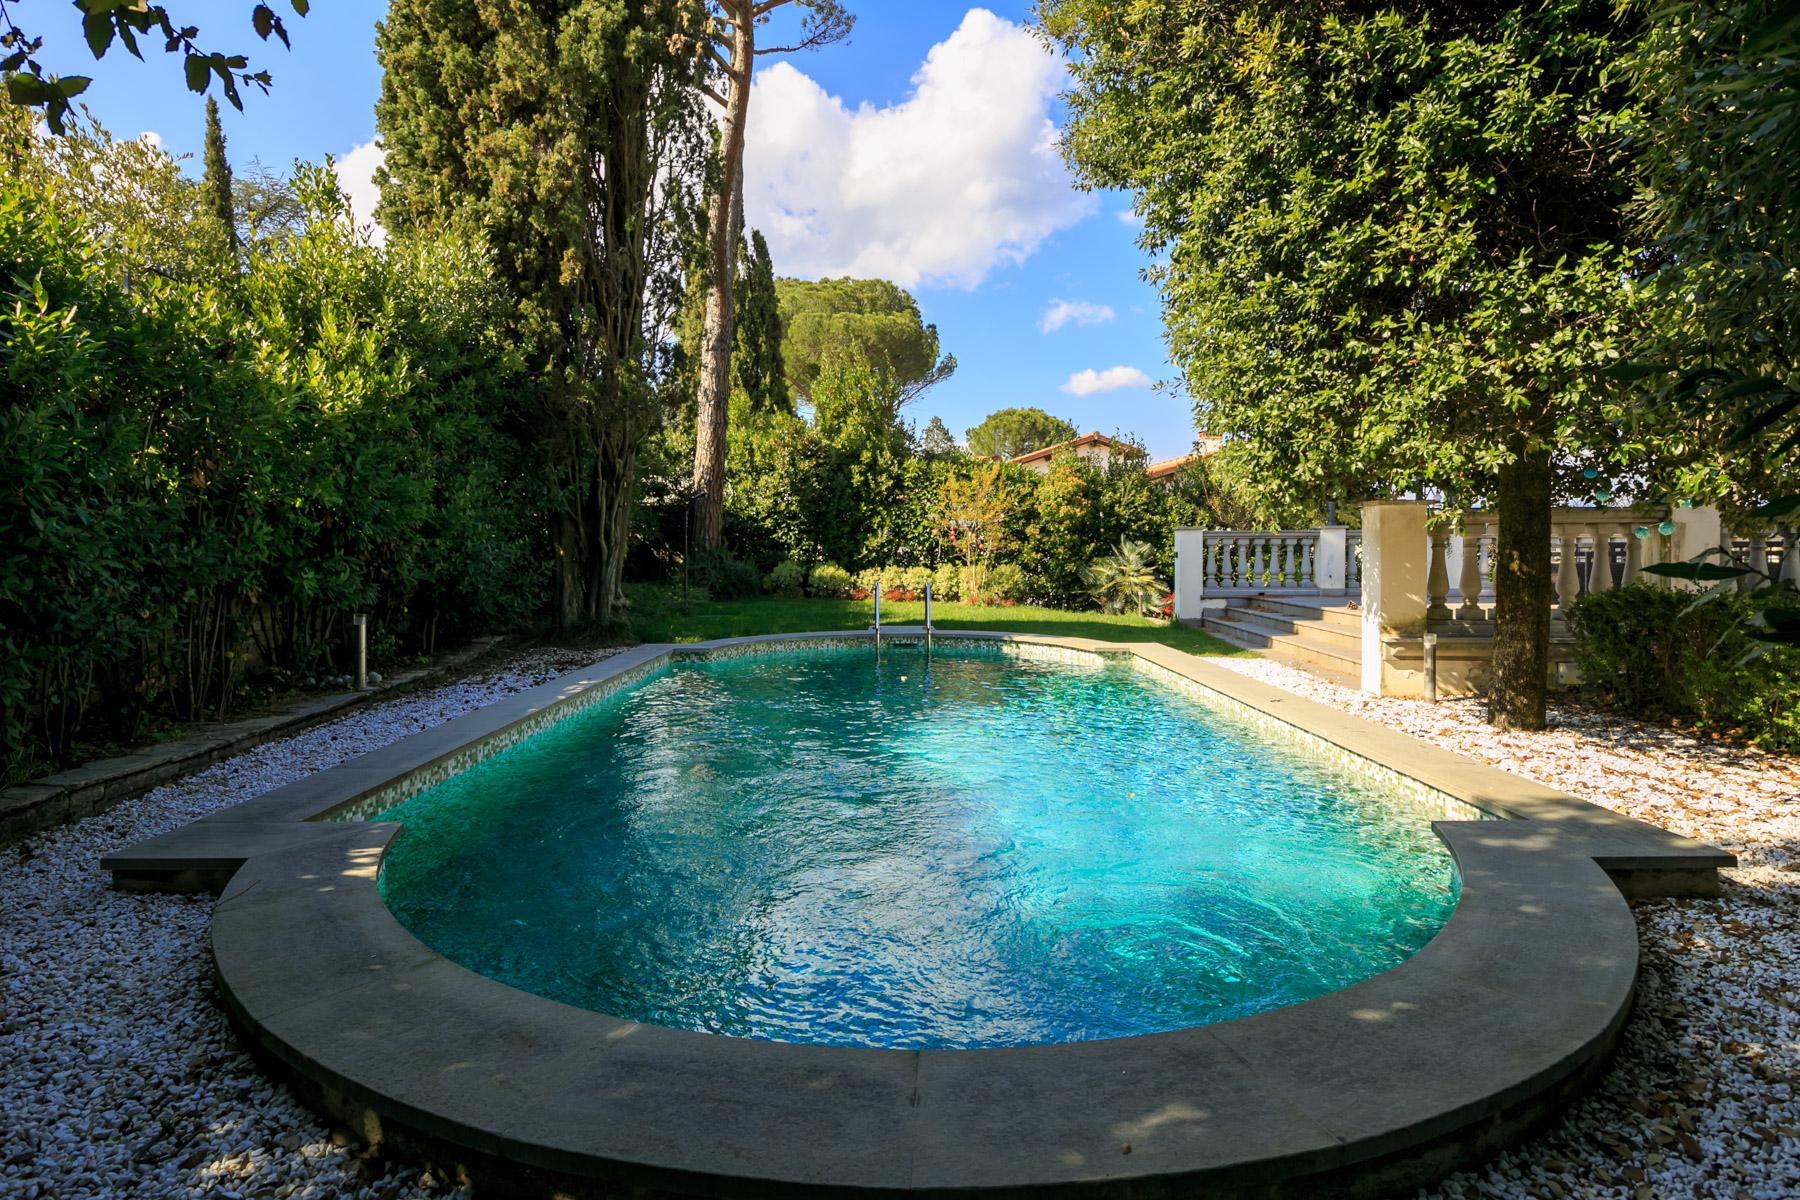 Splendid villa with pool on the Poggio Imperiale hill in Florence - 4